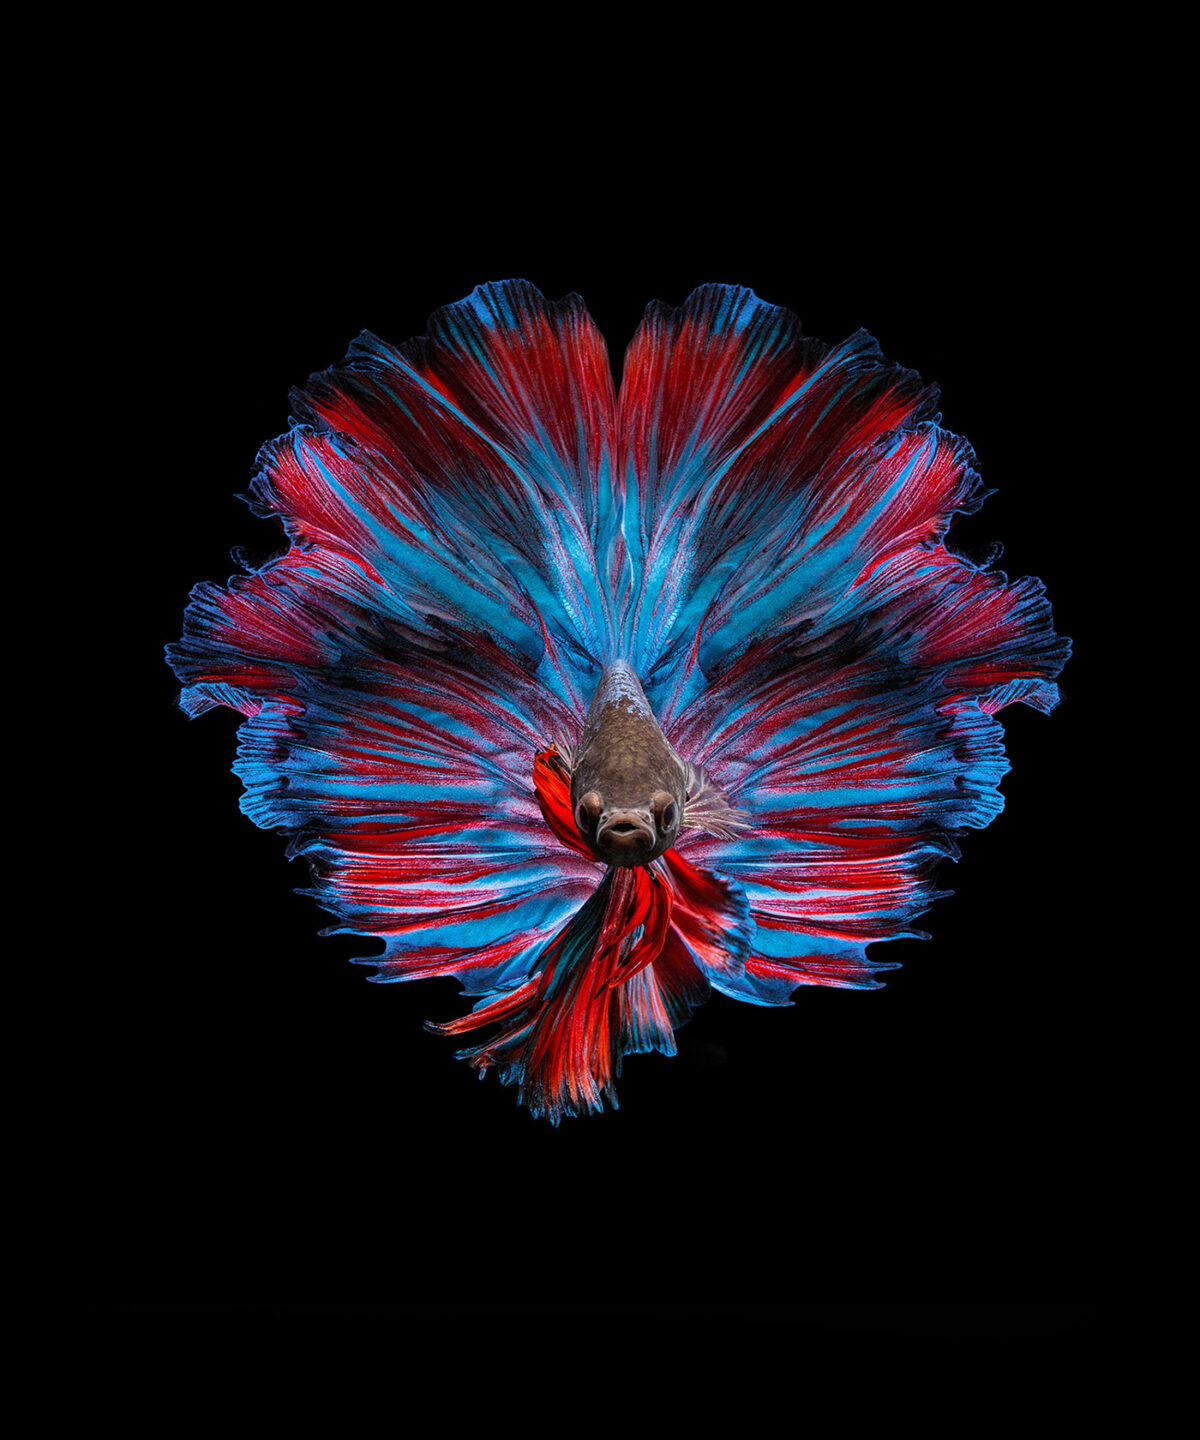 Marvelous Betta Fish Photography By Andi Halil (7)